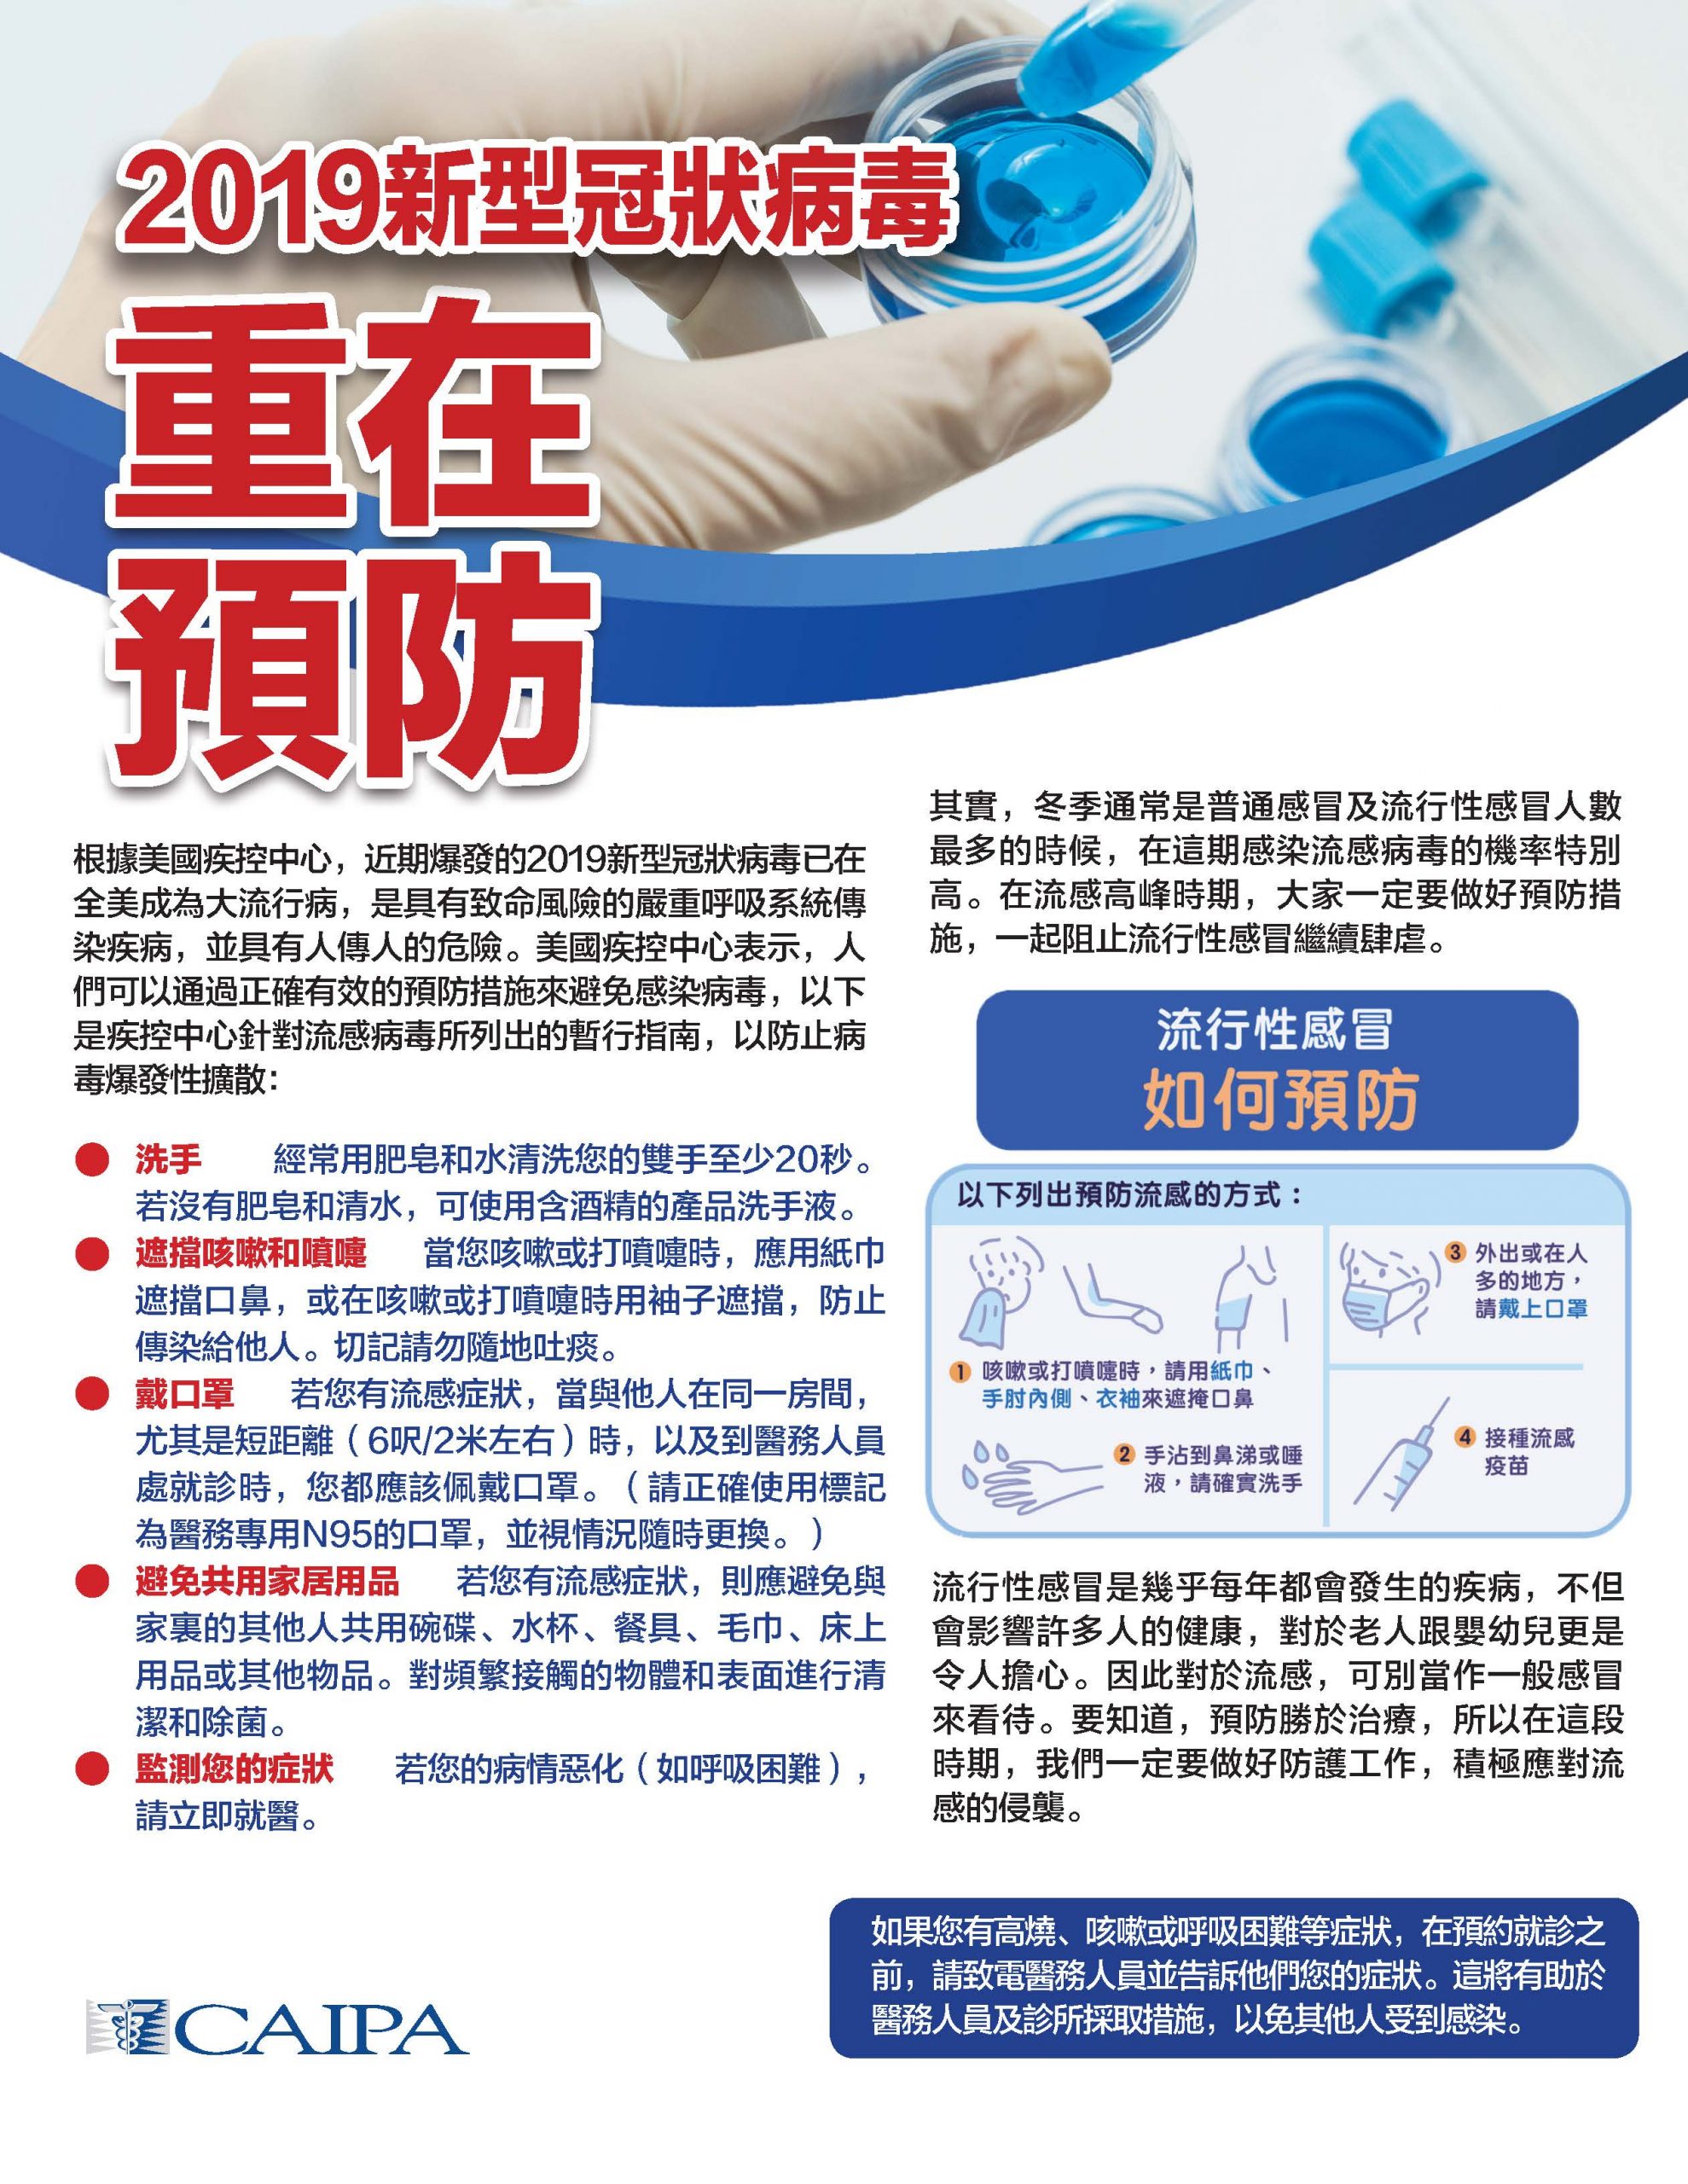 COVID-19 Prevention Flyer CHINESE